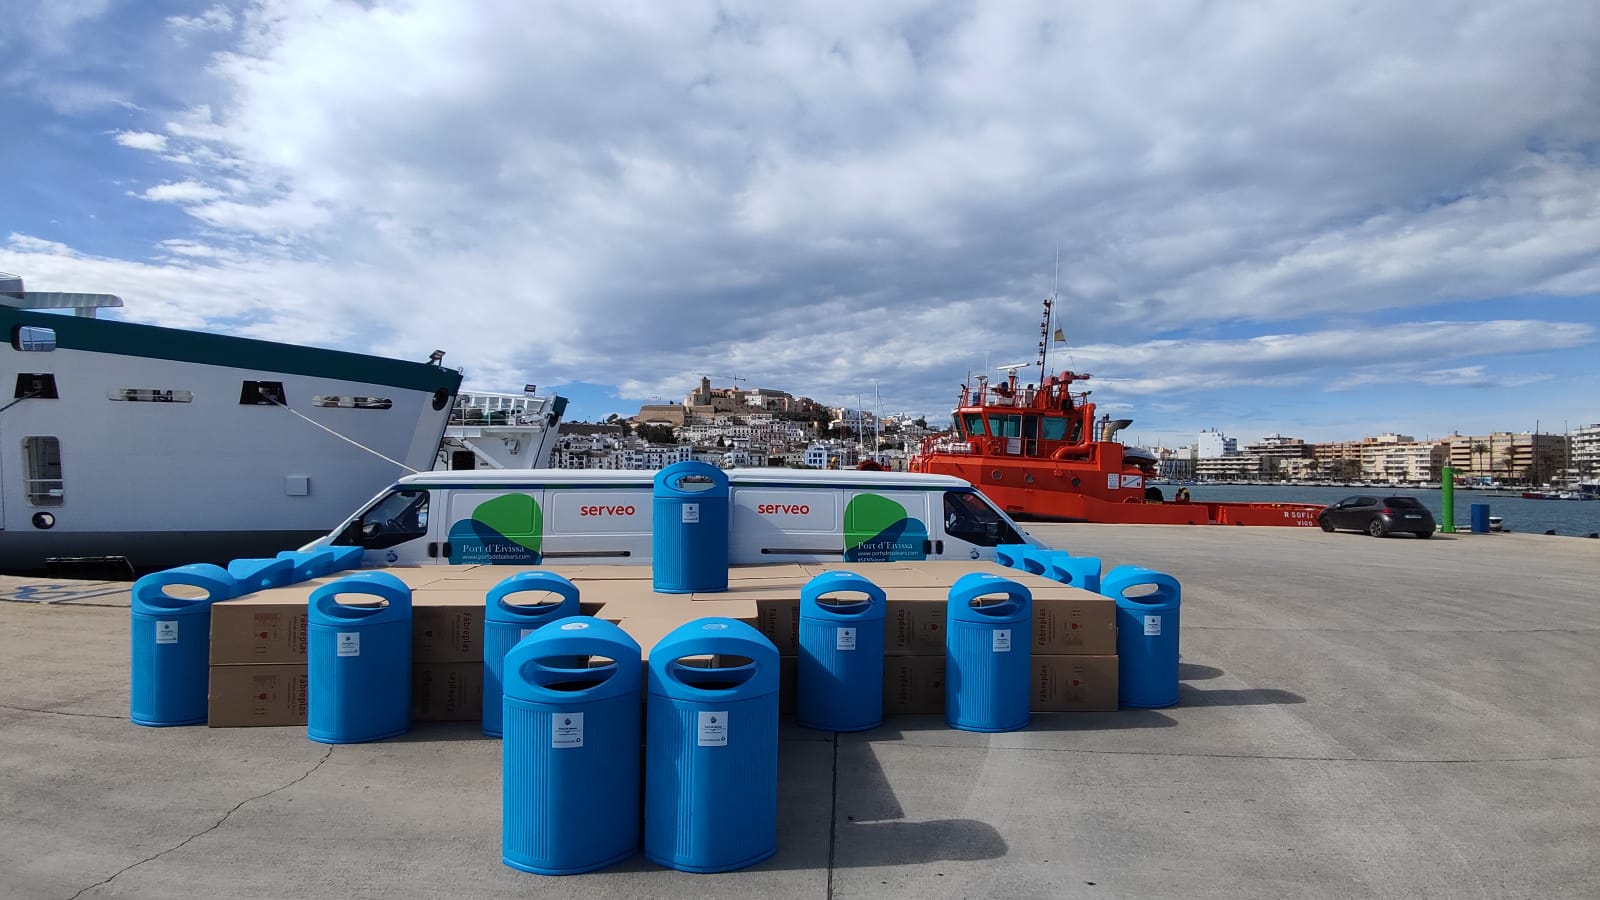 The APB adds 75 litter bins made from recycled fishing nets to the Port of Eivissa